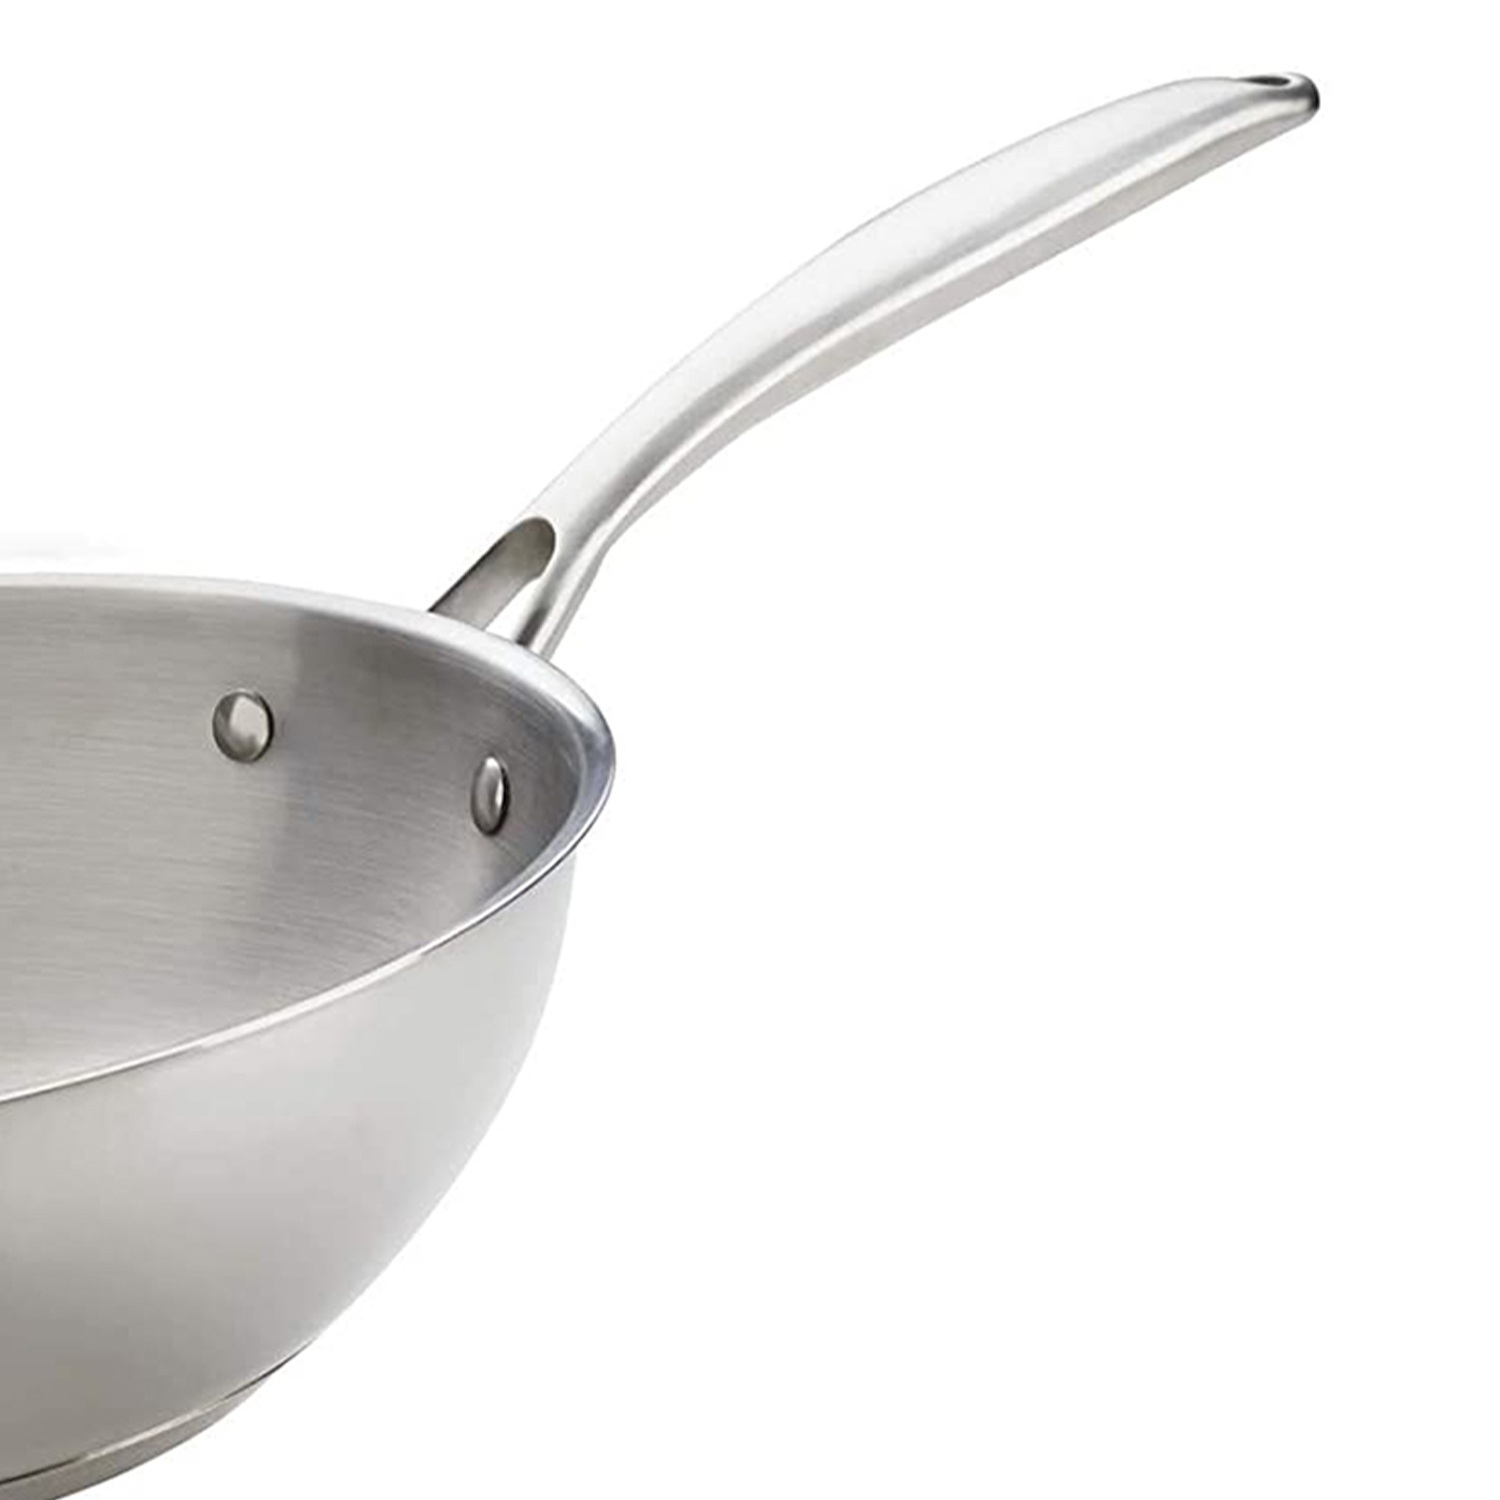 Stainless Steel Wok - image 5 of 5